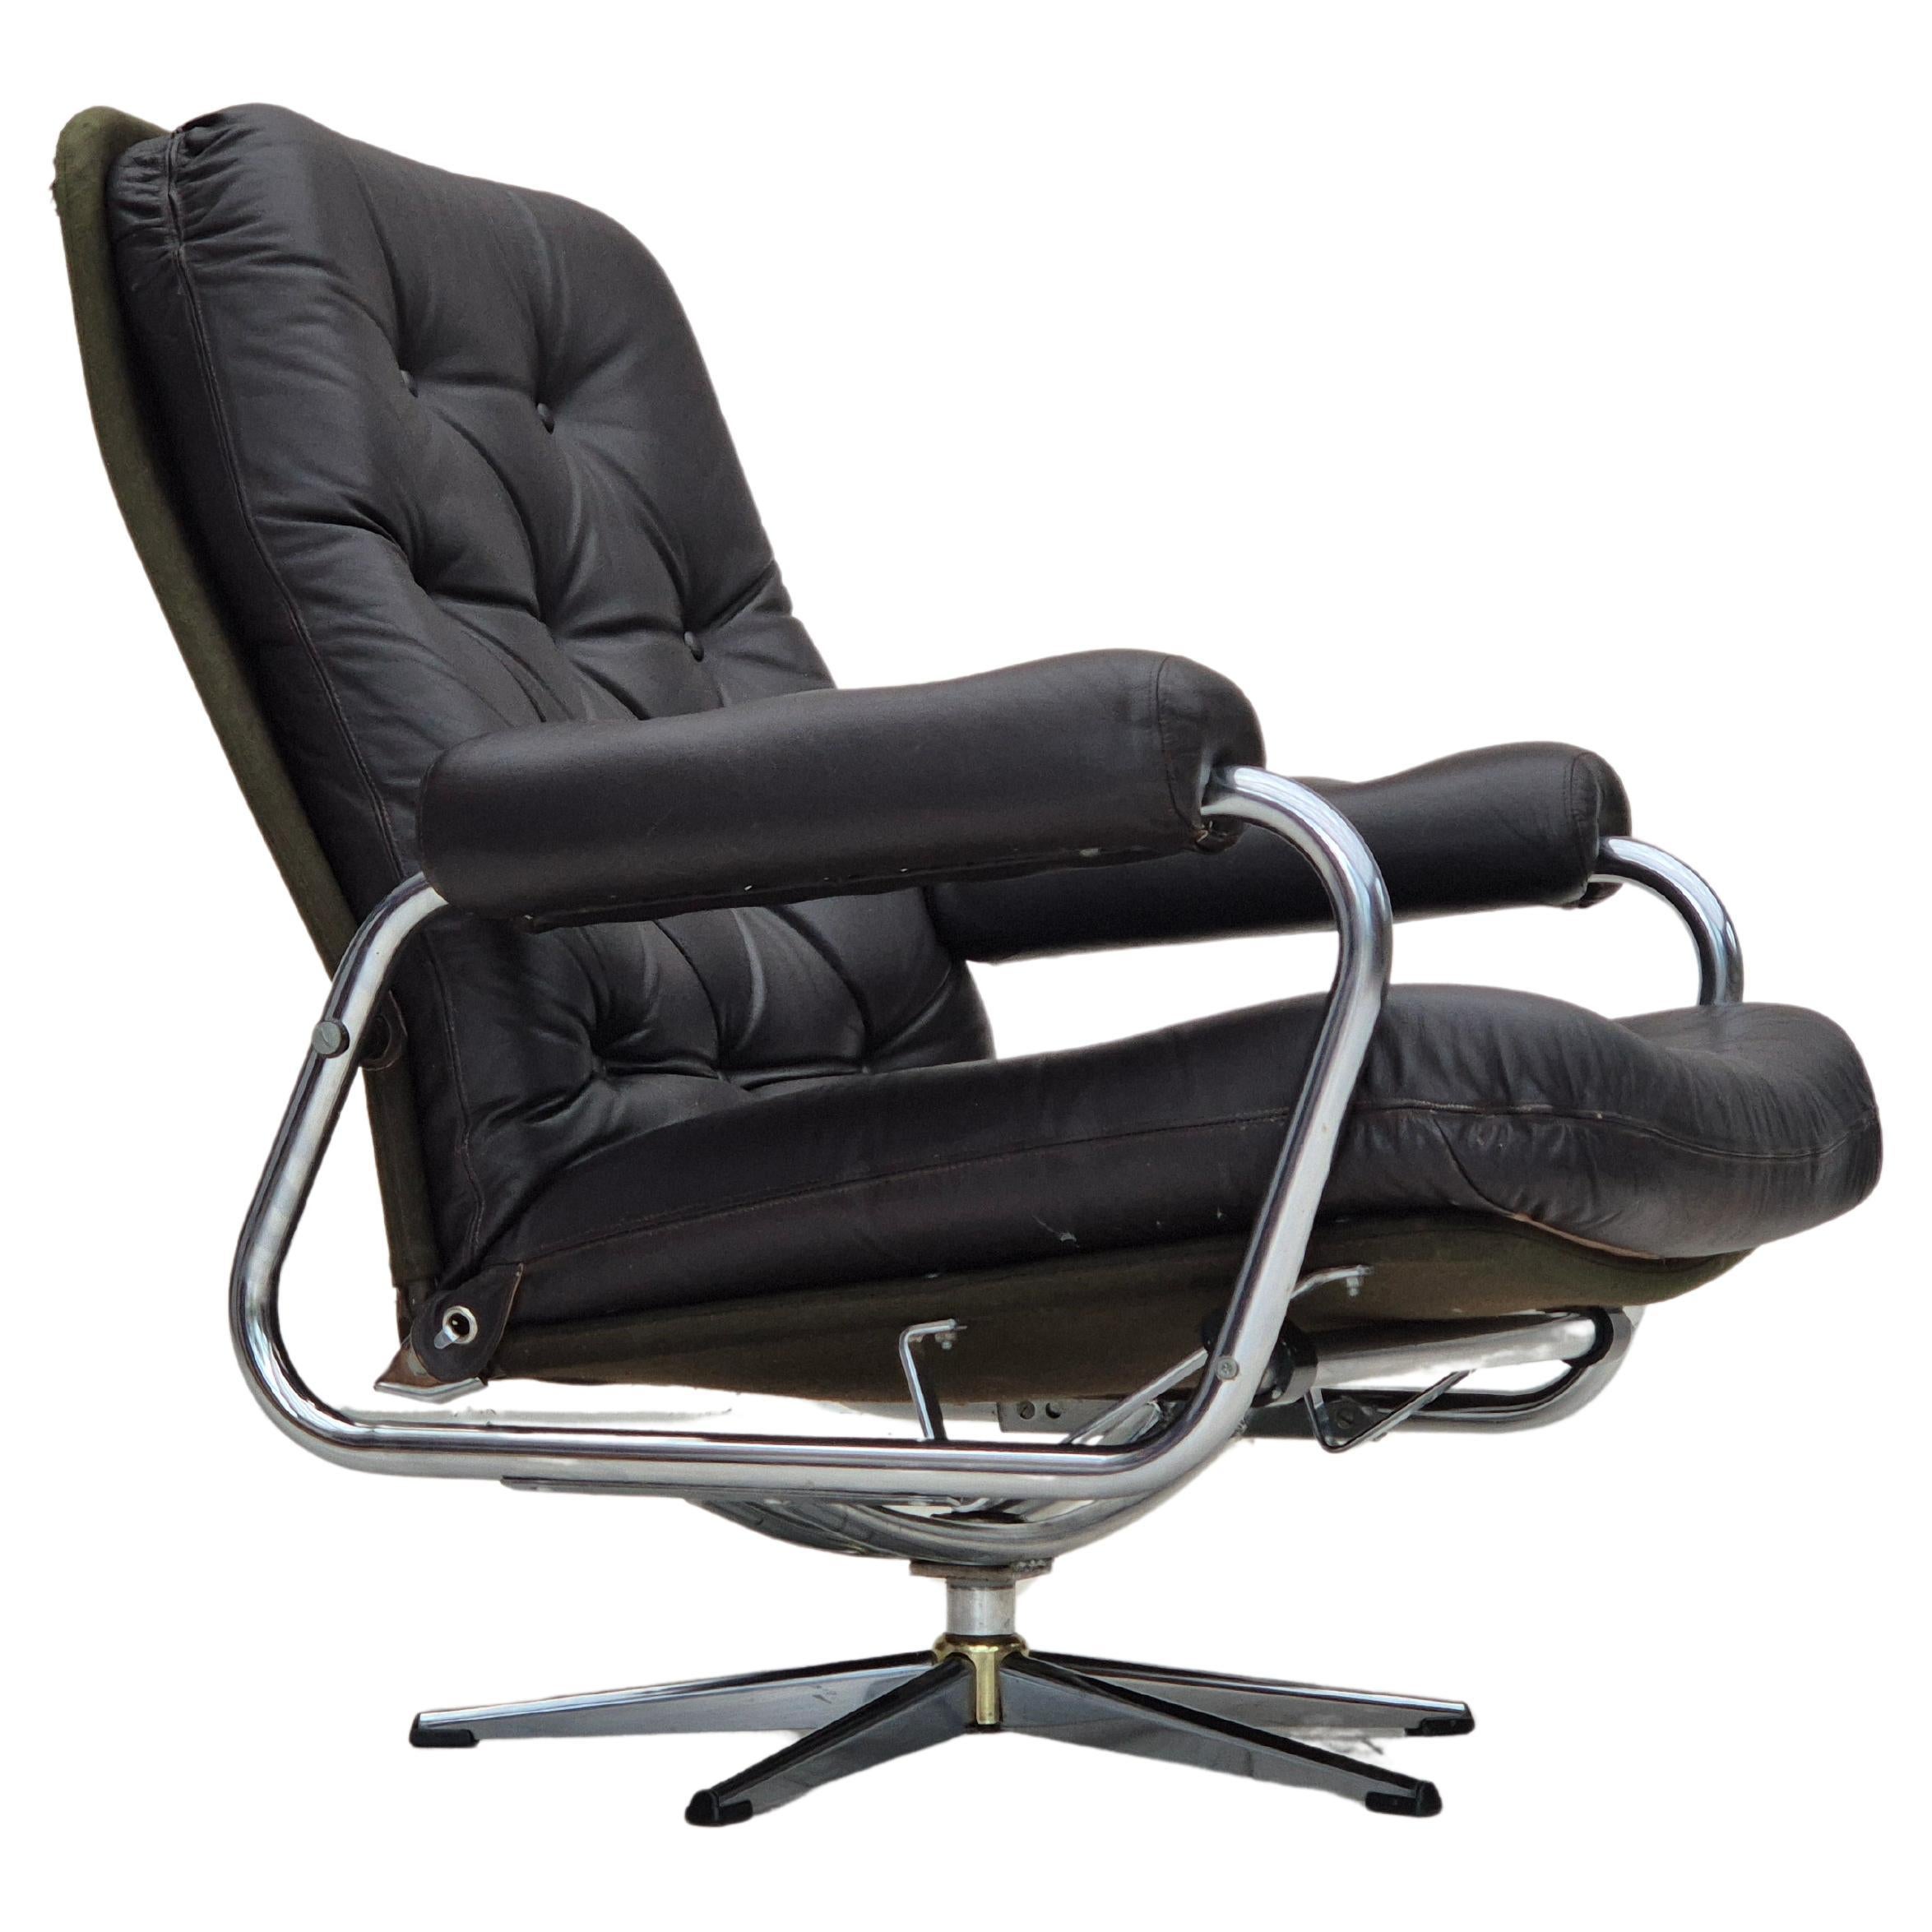 1970s, Danish swivel chair, original condition, leather, chrome steel. For Sale